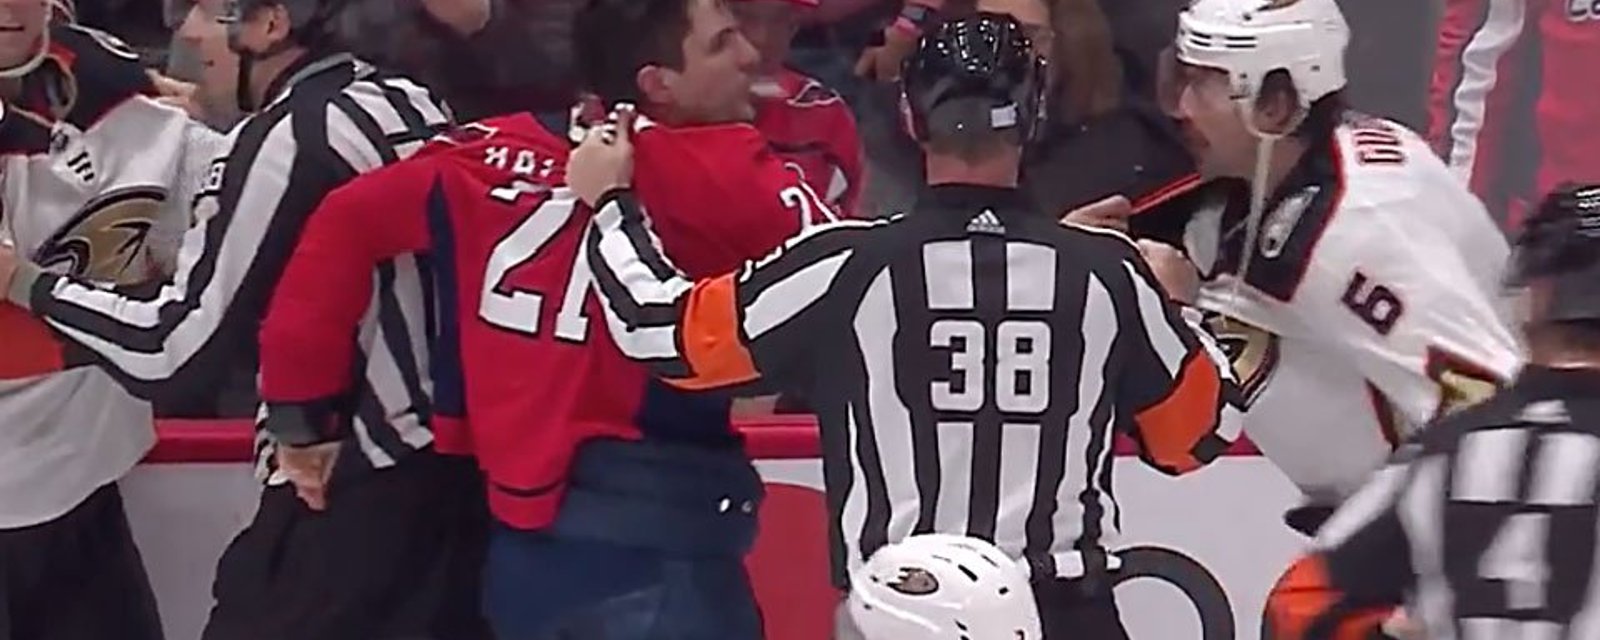 Breaking: Multiple-game suspension for Hathaway for spitting on Gudbranson 